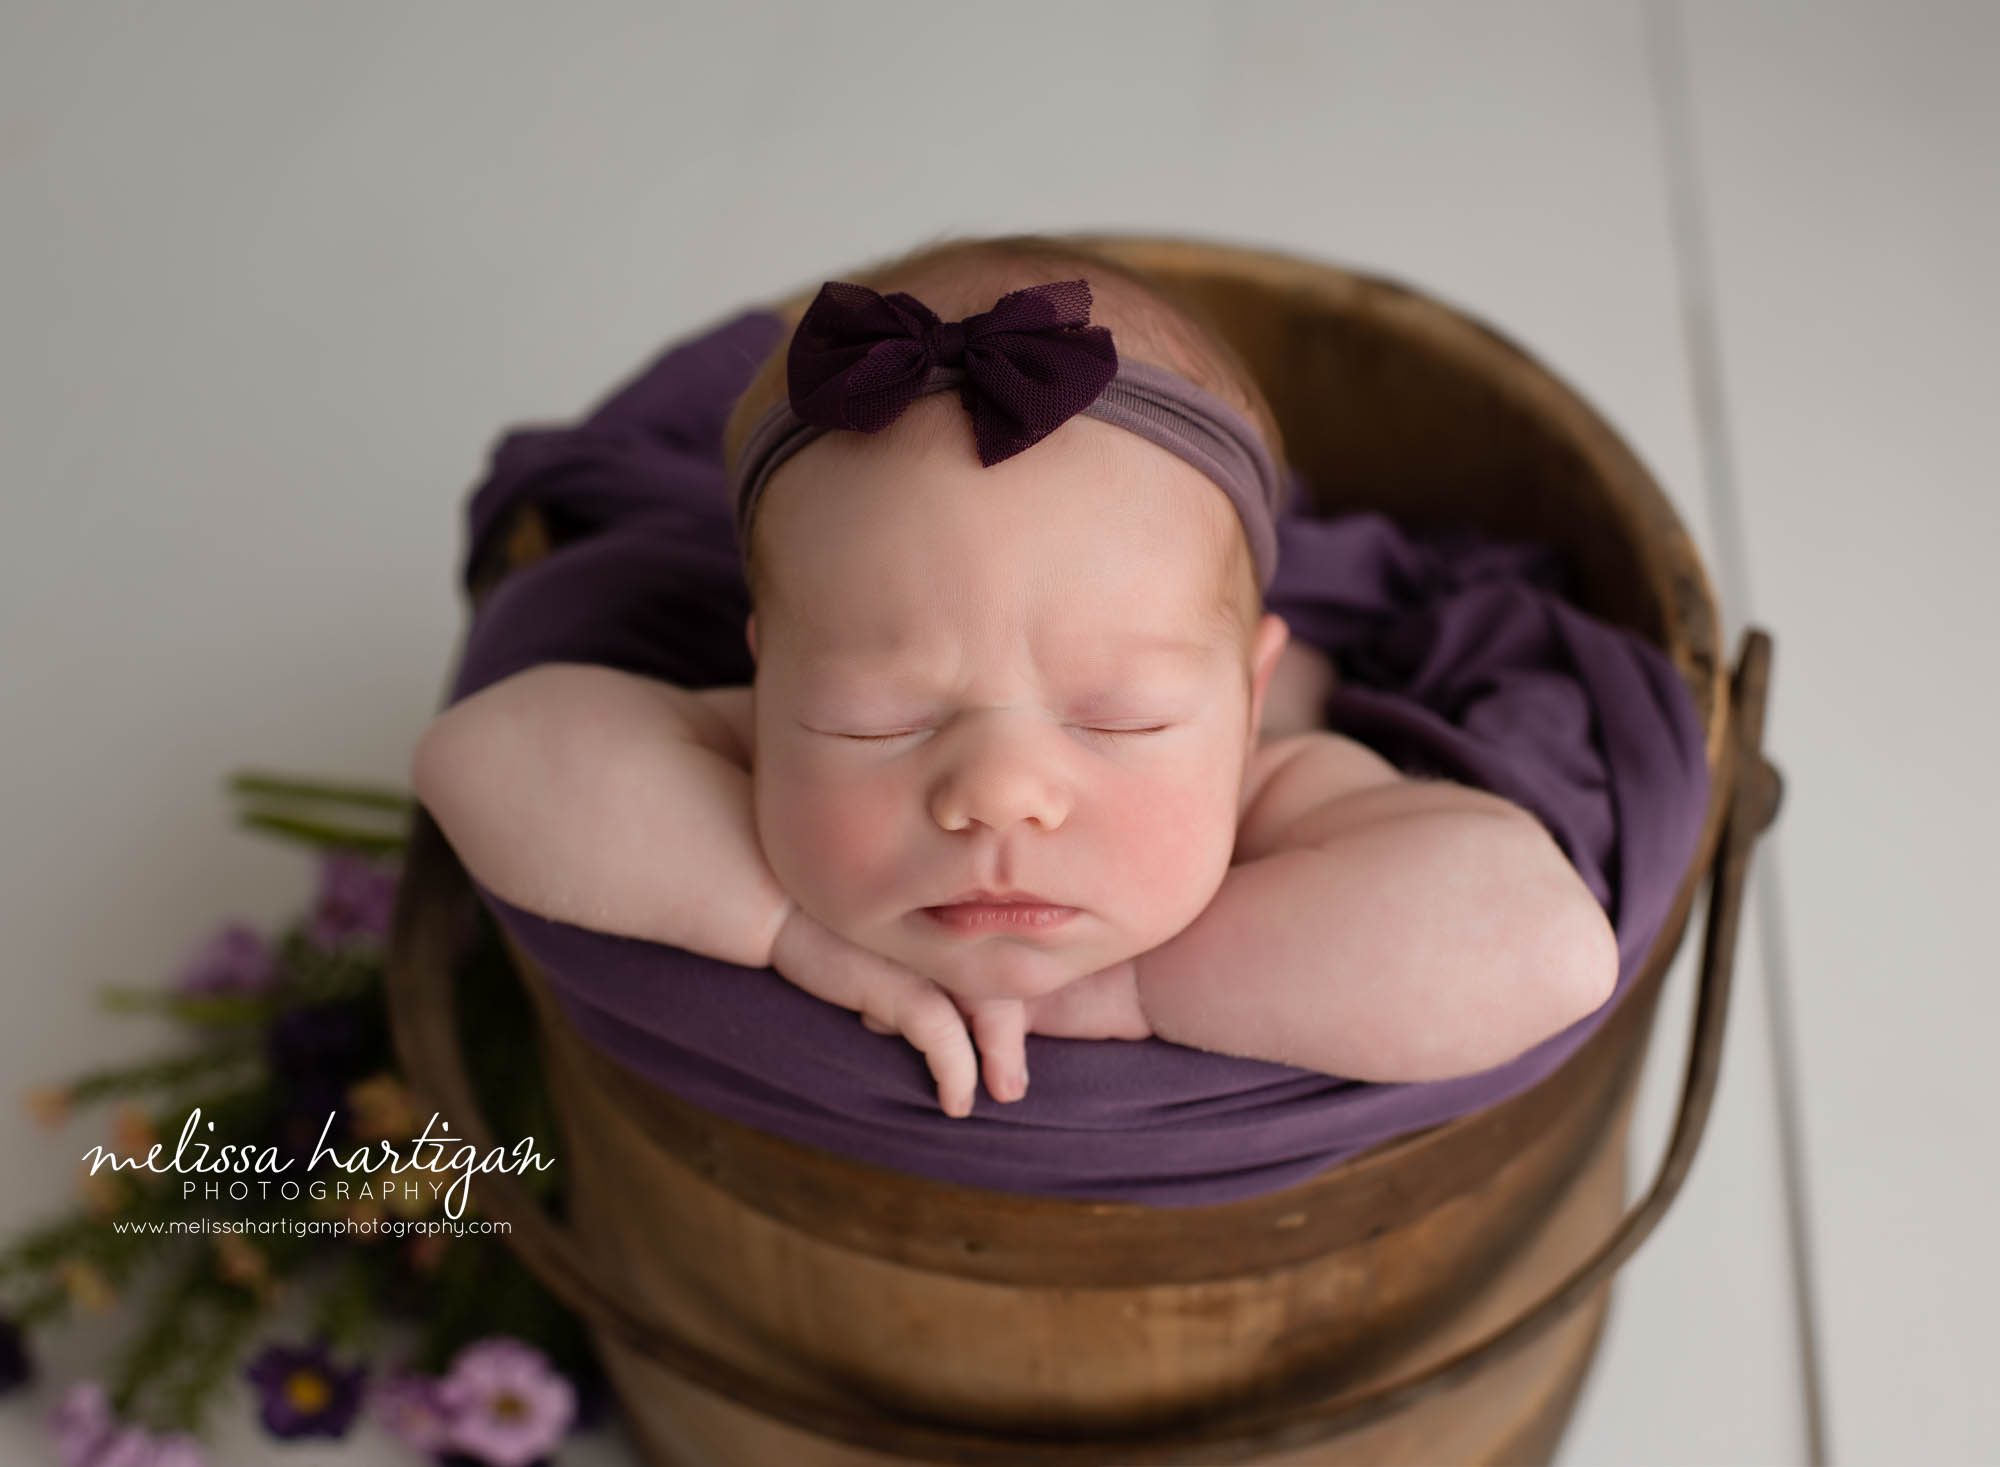 Newborn baby girl posed in wooden bucket with purple flower elements and purple bow headband